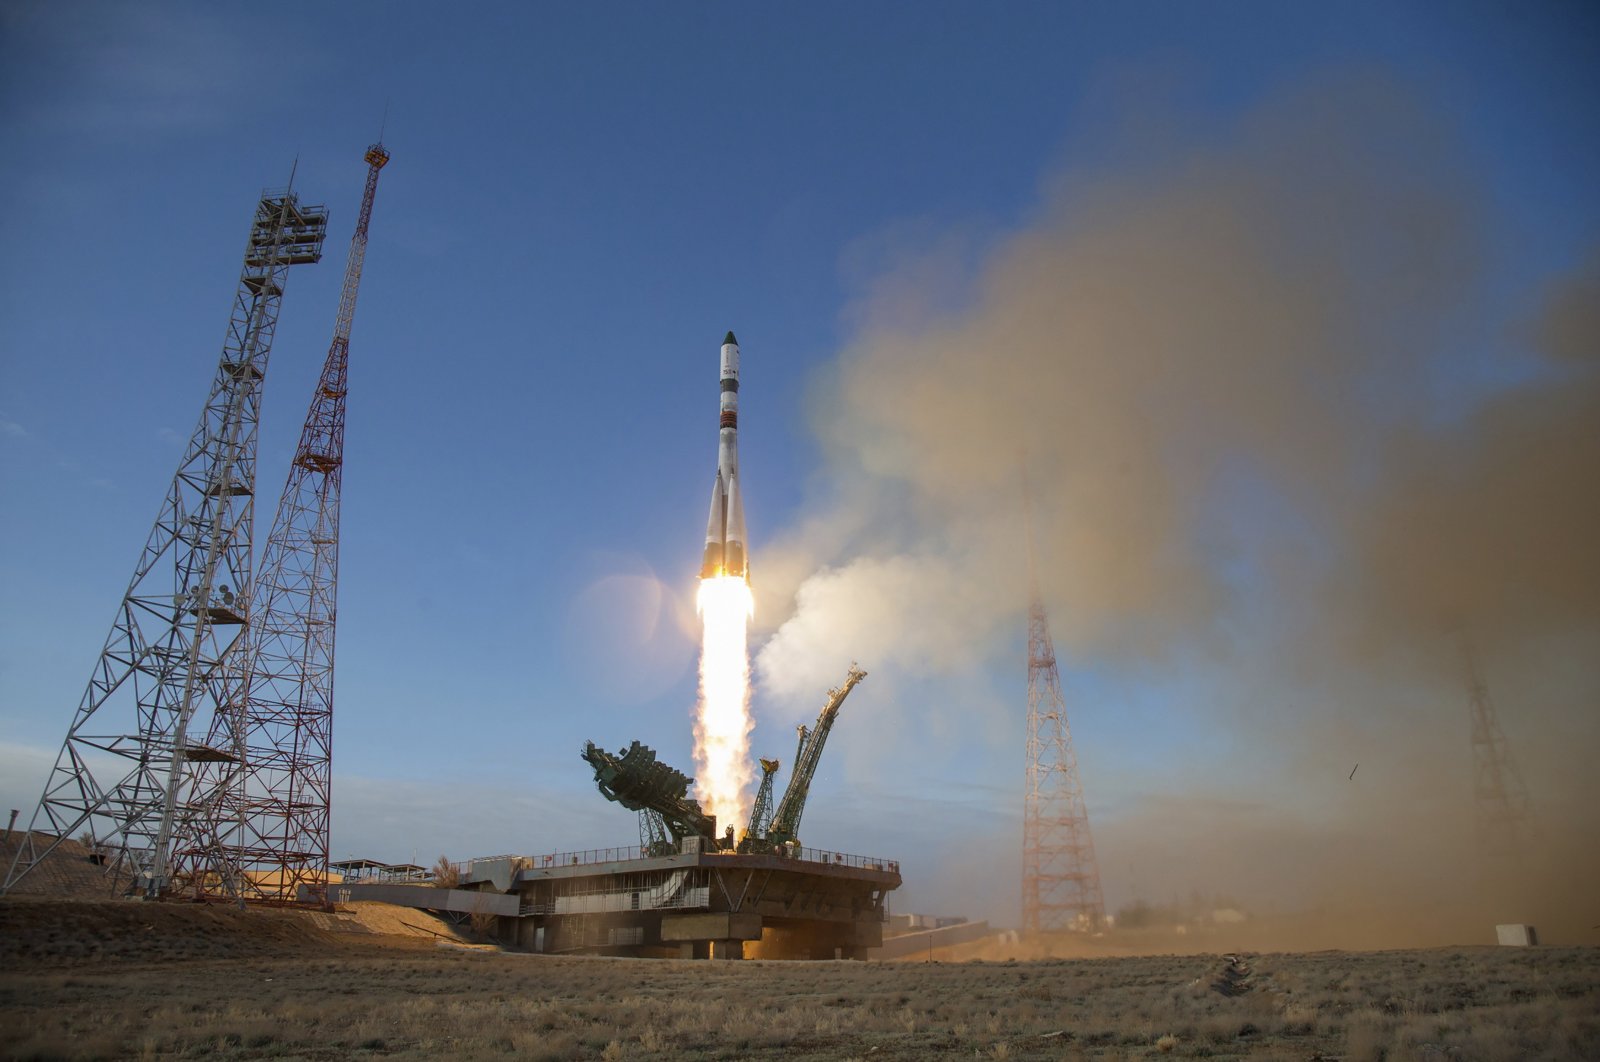 In this photo distributed by Roscosmos Space Agency Press Service, the Russian Progress MS-14 cargo spacecraft blasts off from the launch pad at Russia's space facility in Baikonur, Kazakhstan Saturday, April 25, 2020. (AP Photo)